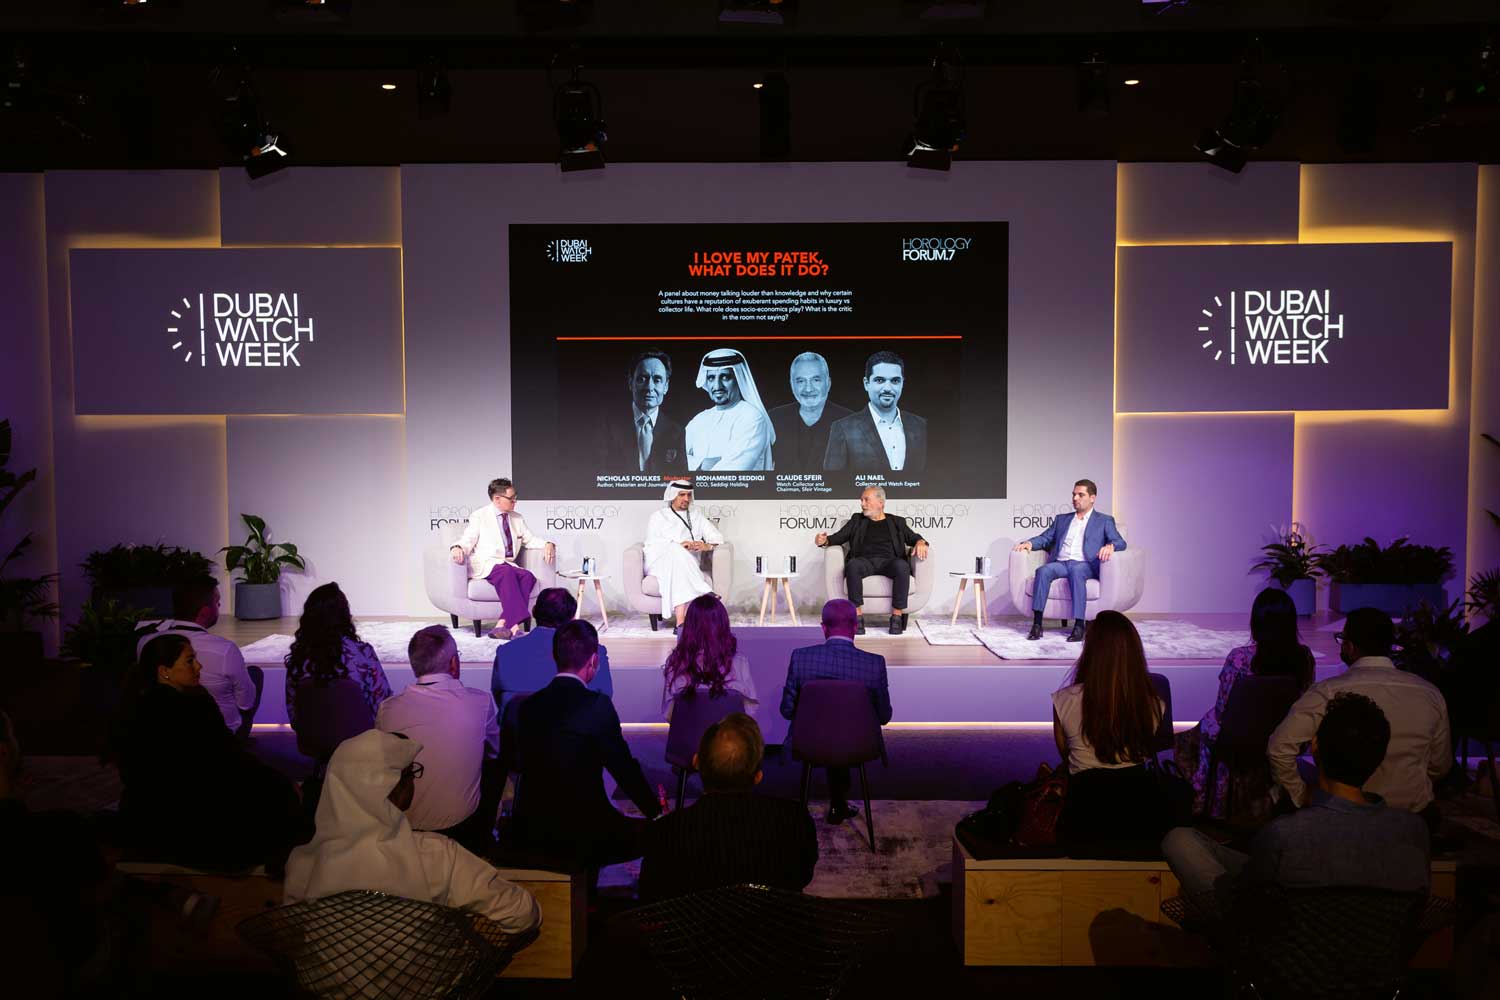 Dubai Watch Week features panel discussions involving knowledgeable leaders and pertinent horological topics